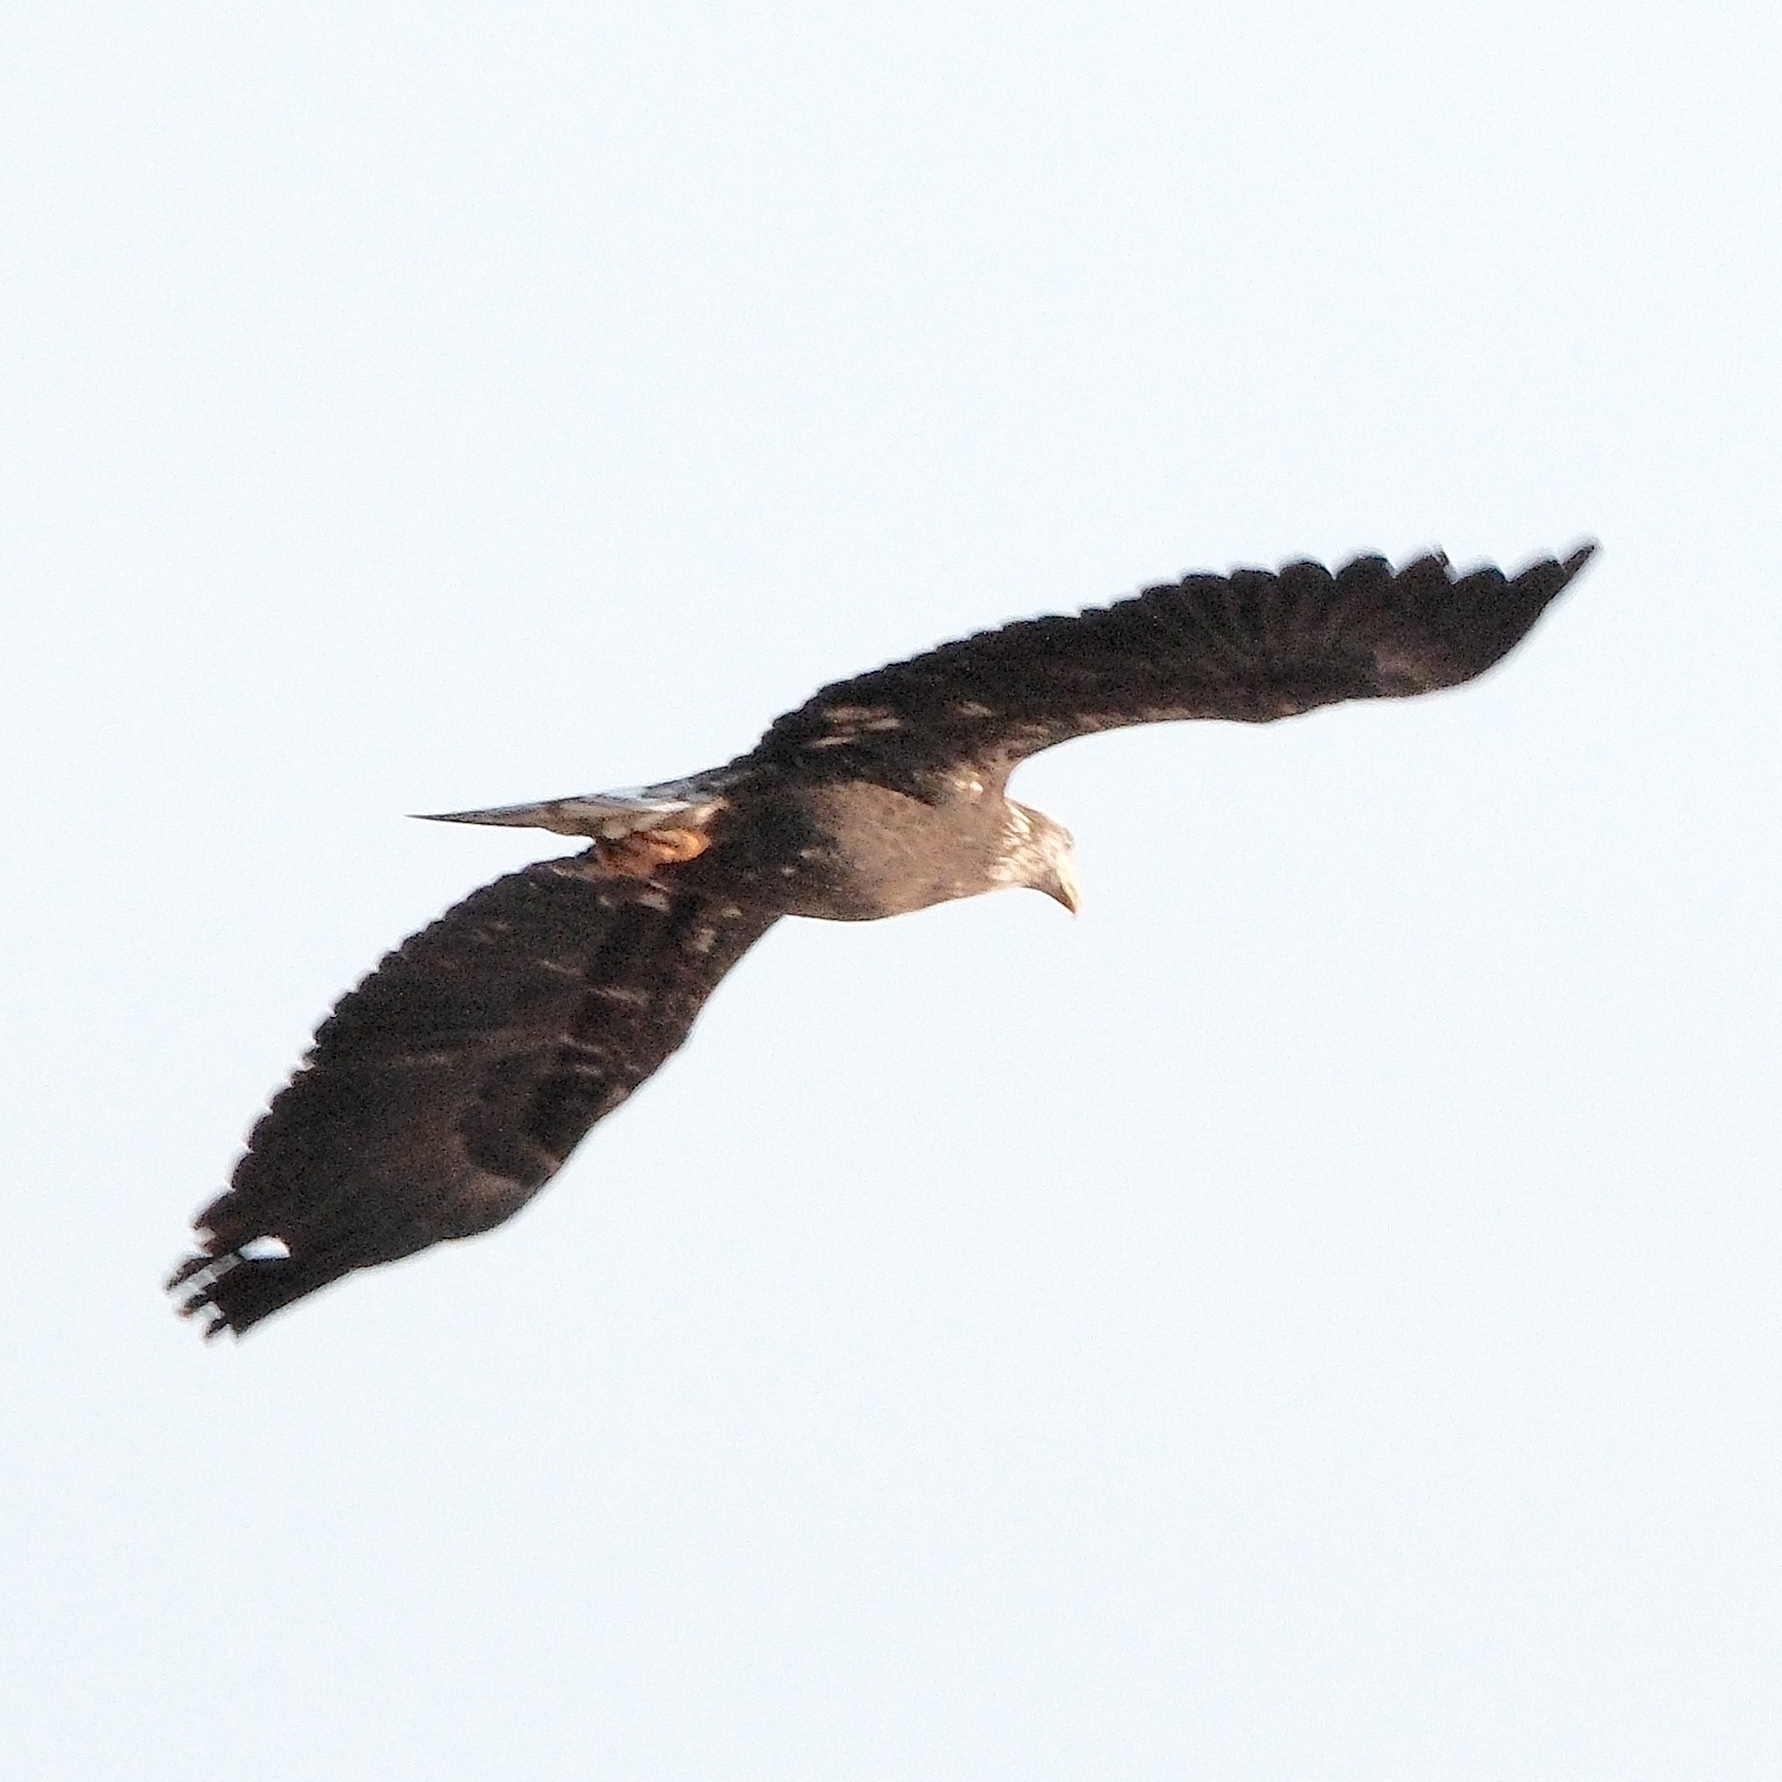 Bald eagle soaring off. Its white head and neck are clearer.